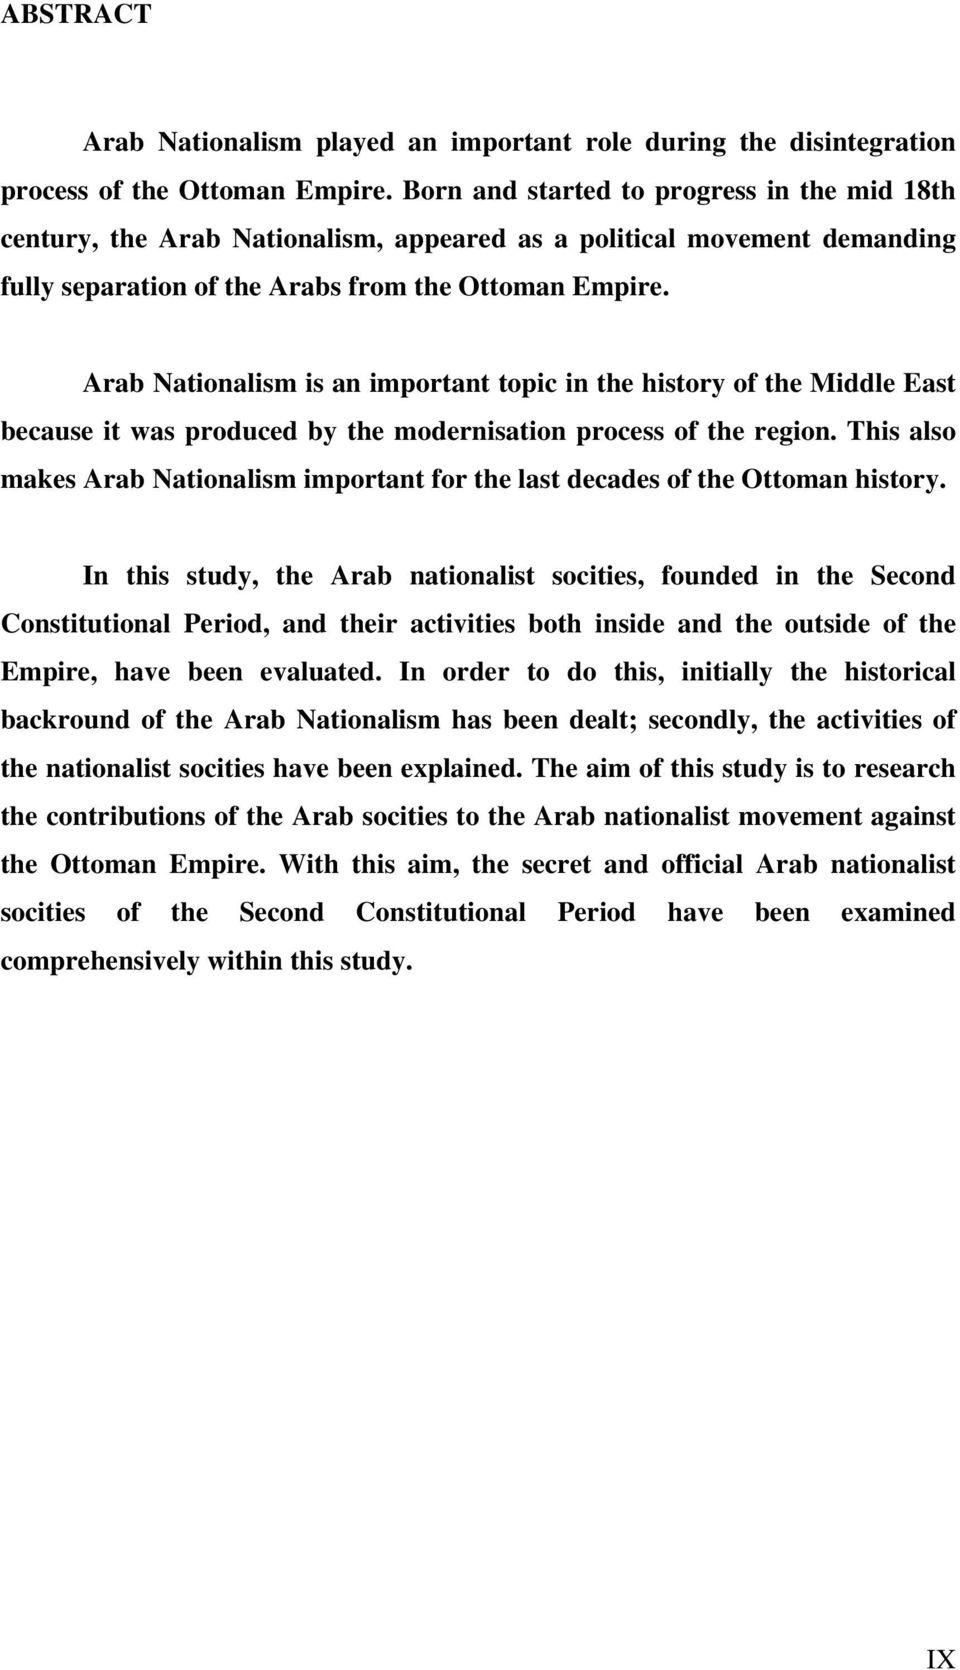 Arab Nationalism is an important topic in the history of the Middle East because it was produced by the modernisation process of the region.